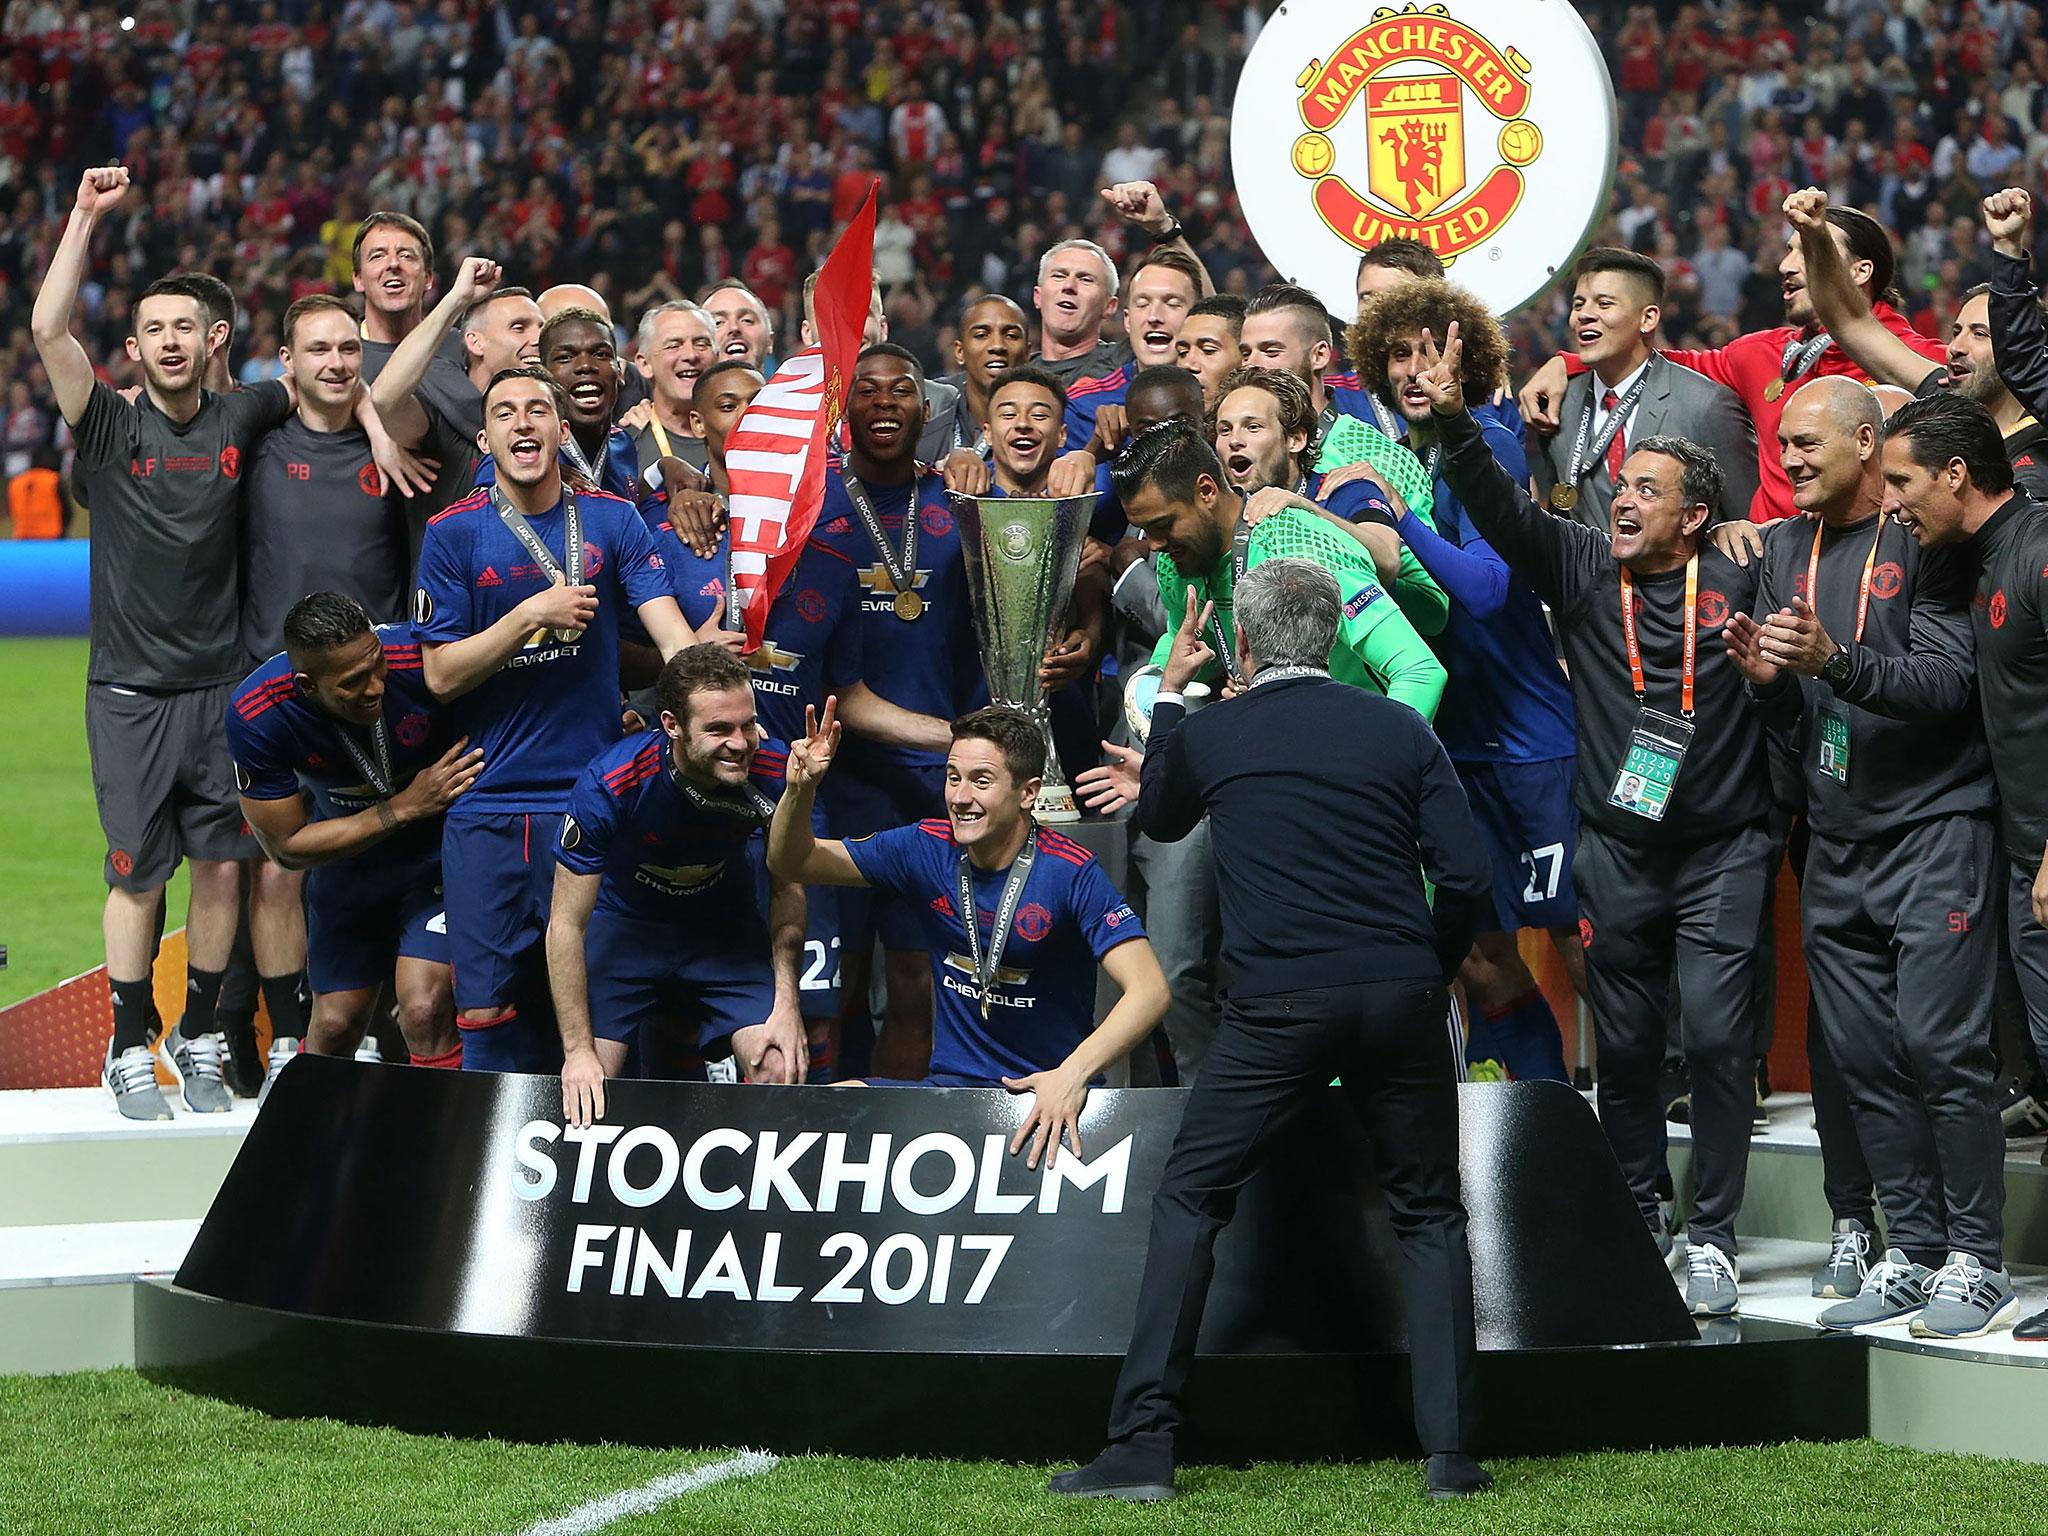 Jose Mourinho tells his Manchester United players to display three fingers after winning the 'treble'